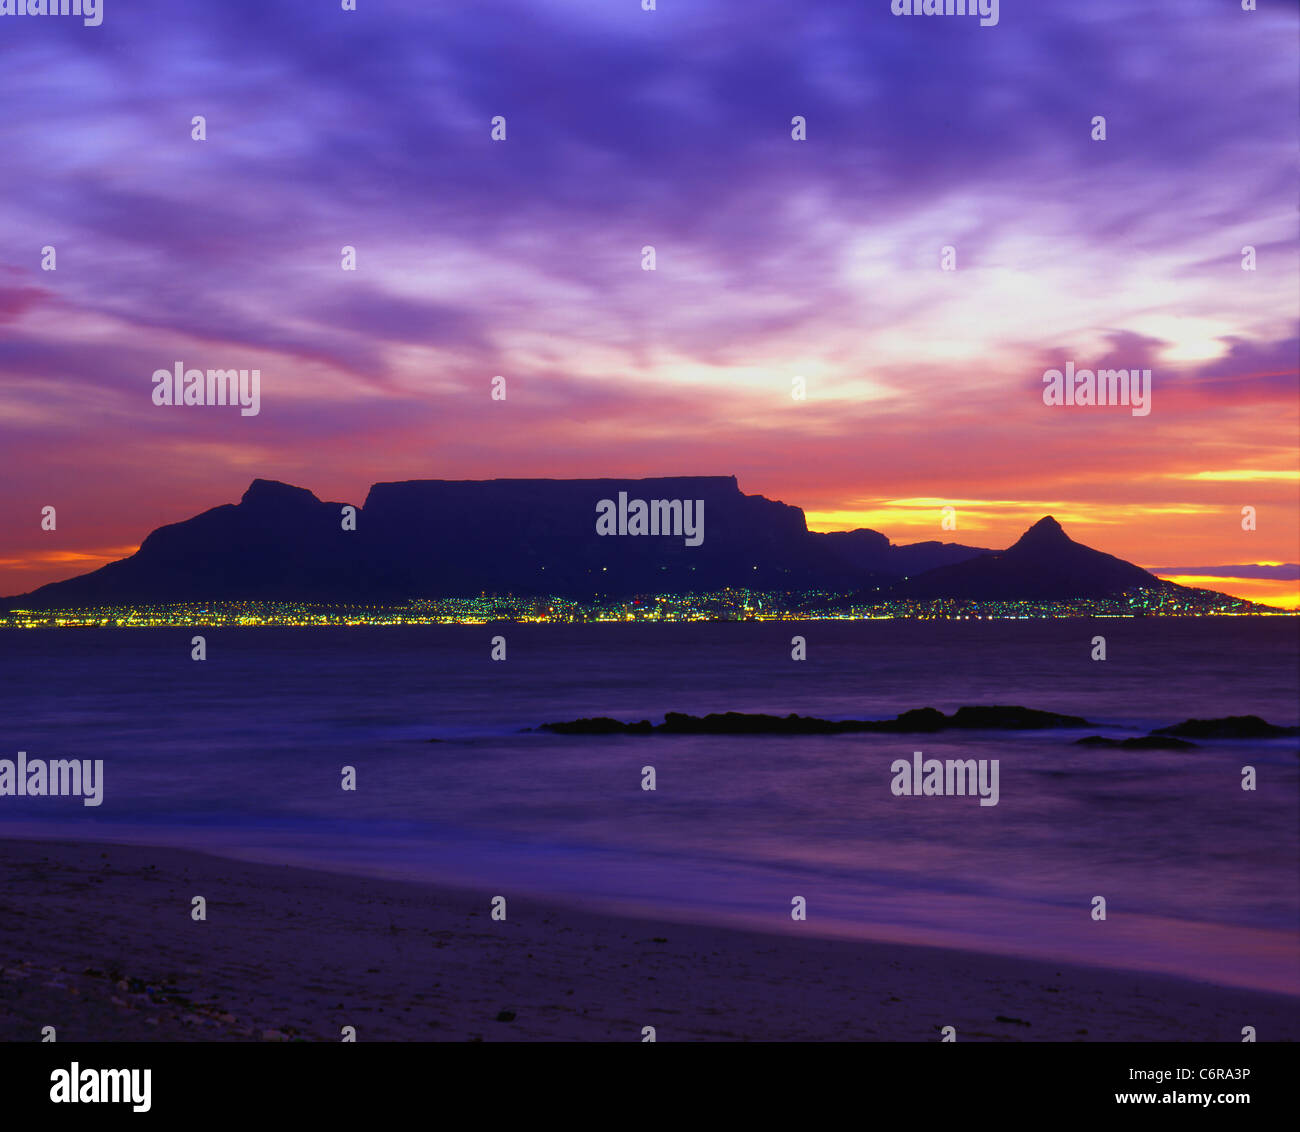 Table mountain at sunset, viewed from Blouberg beach with dramatic purple sky Stock Photo